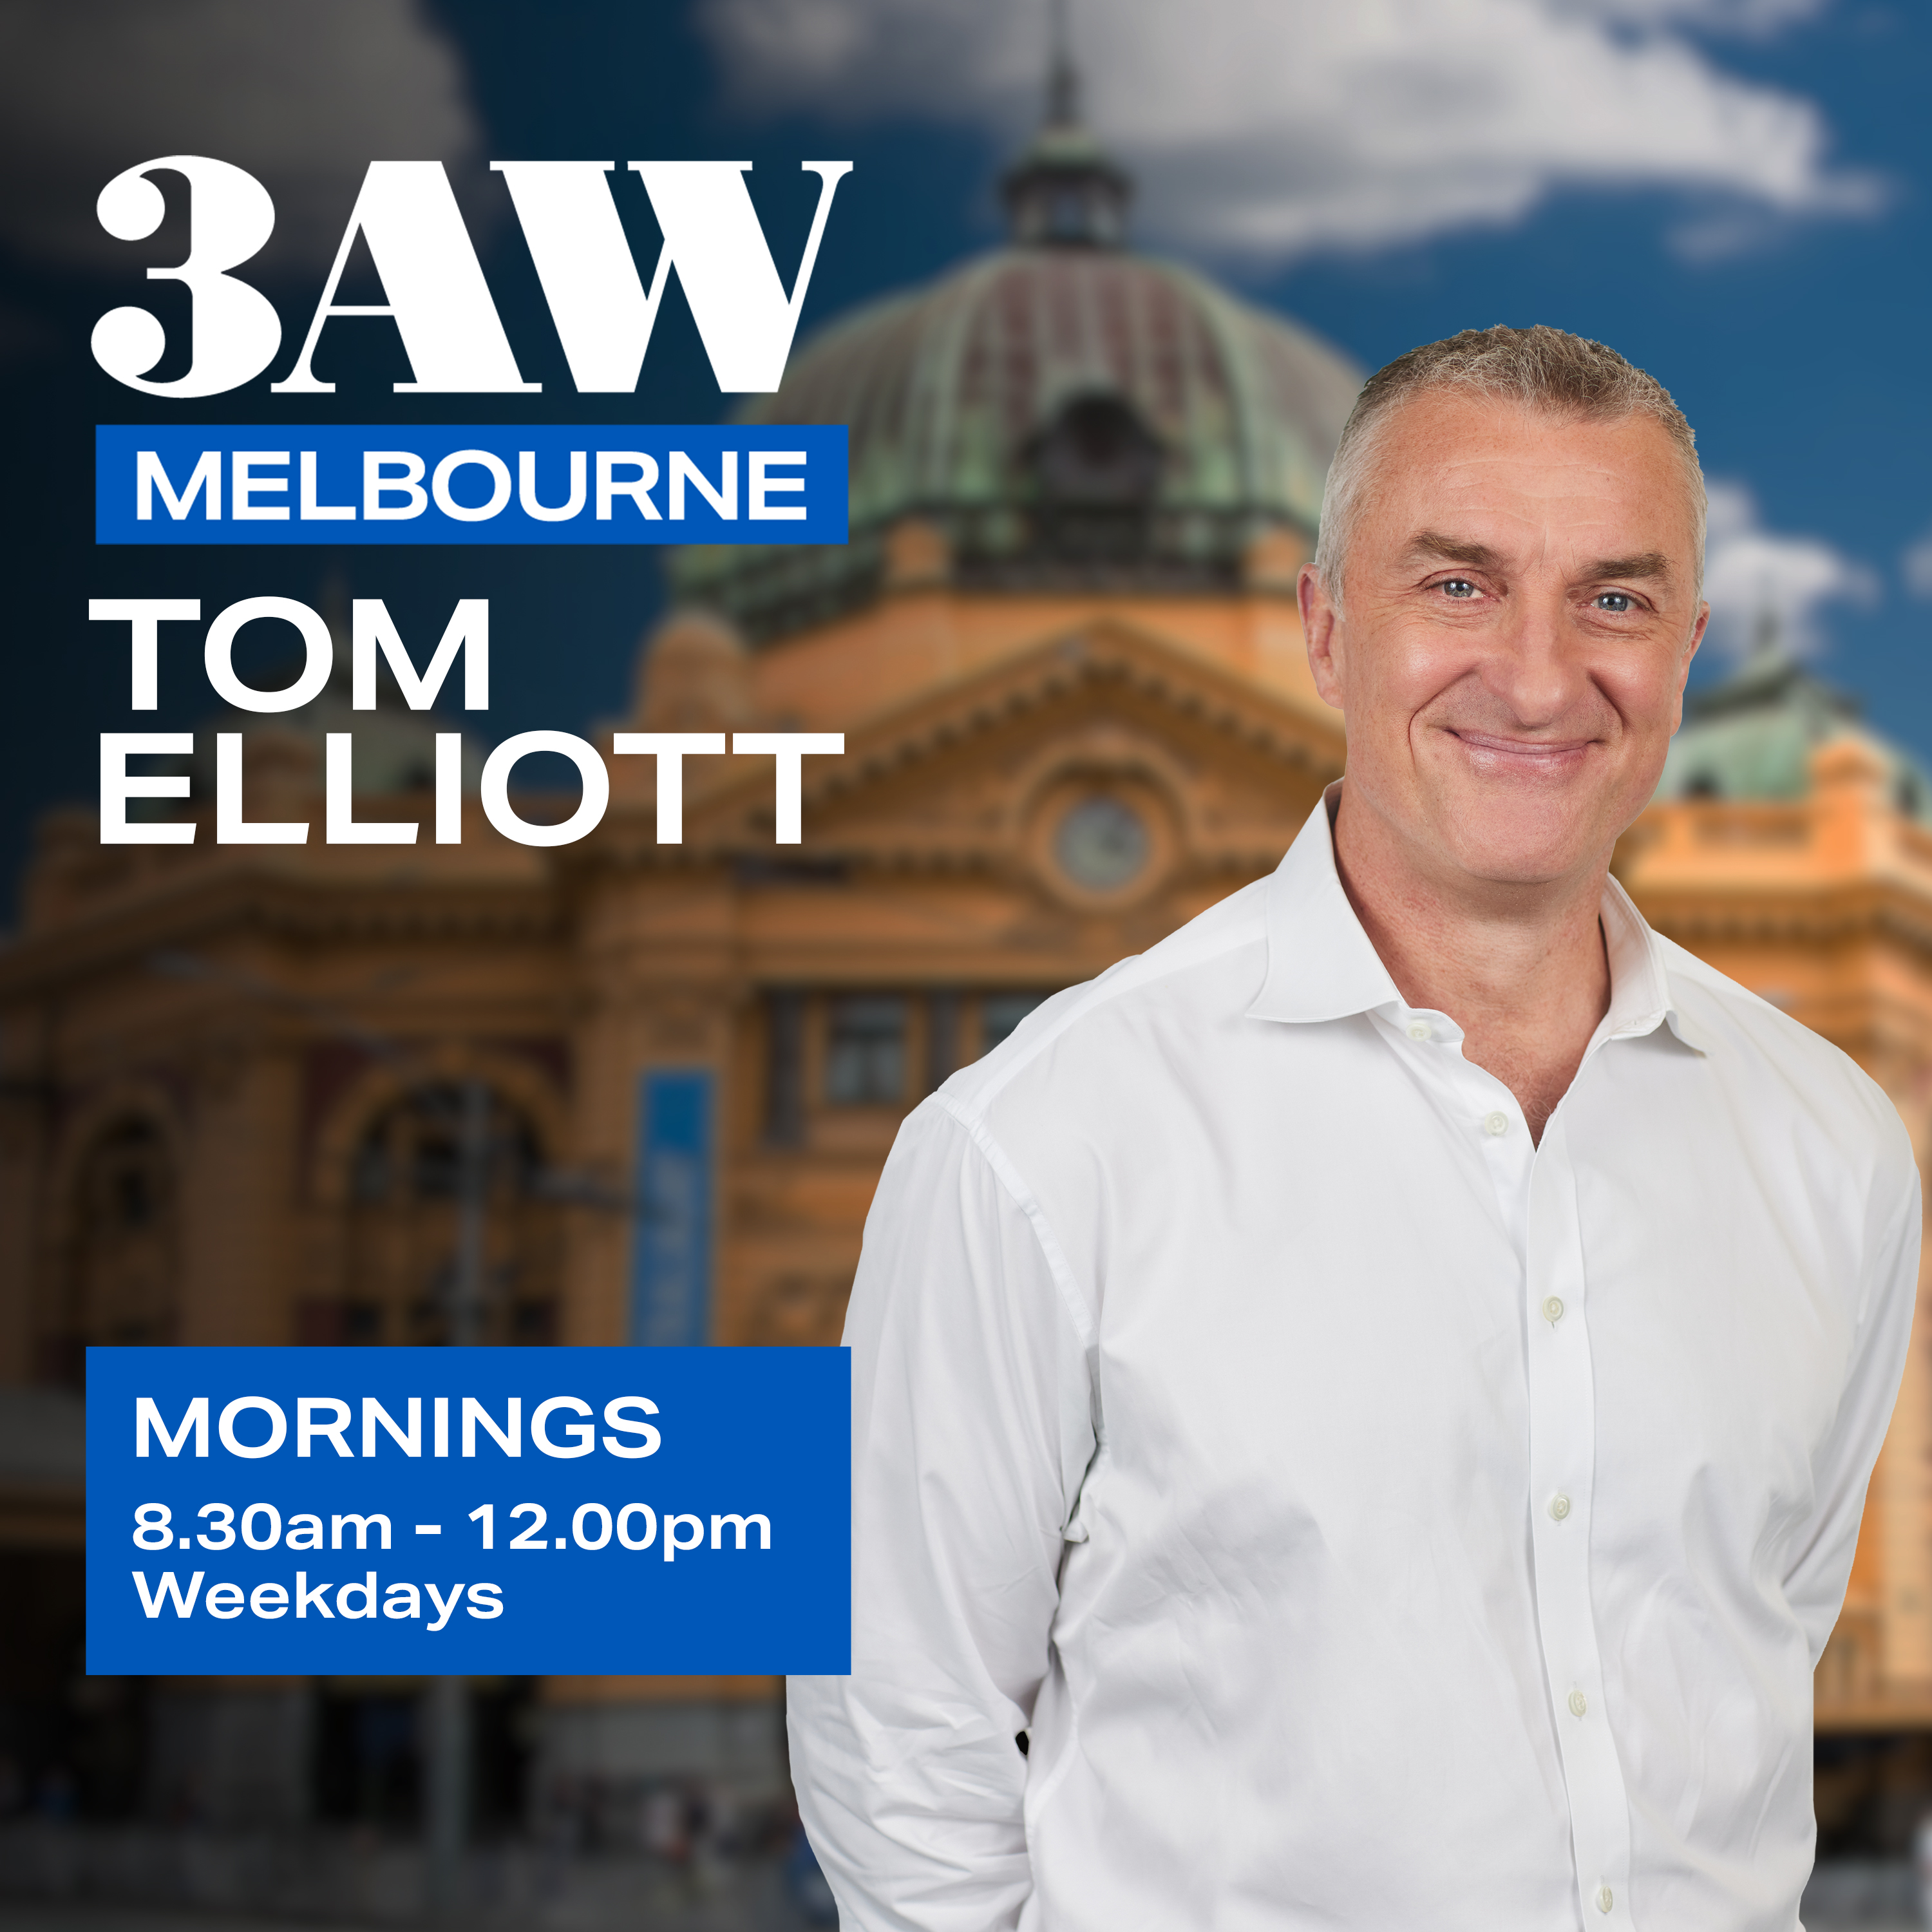 The three changes Tom Elliott thinks should be made to Australia's tax system